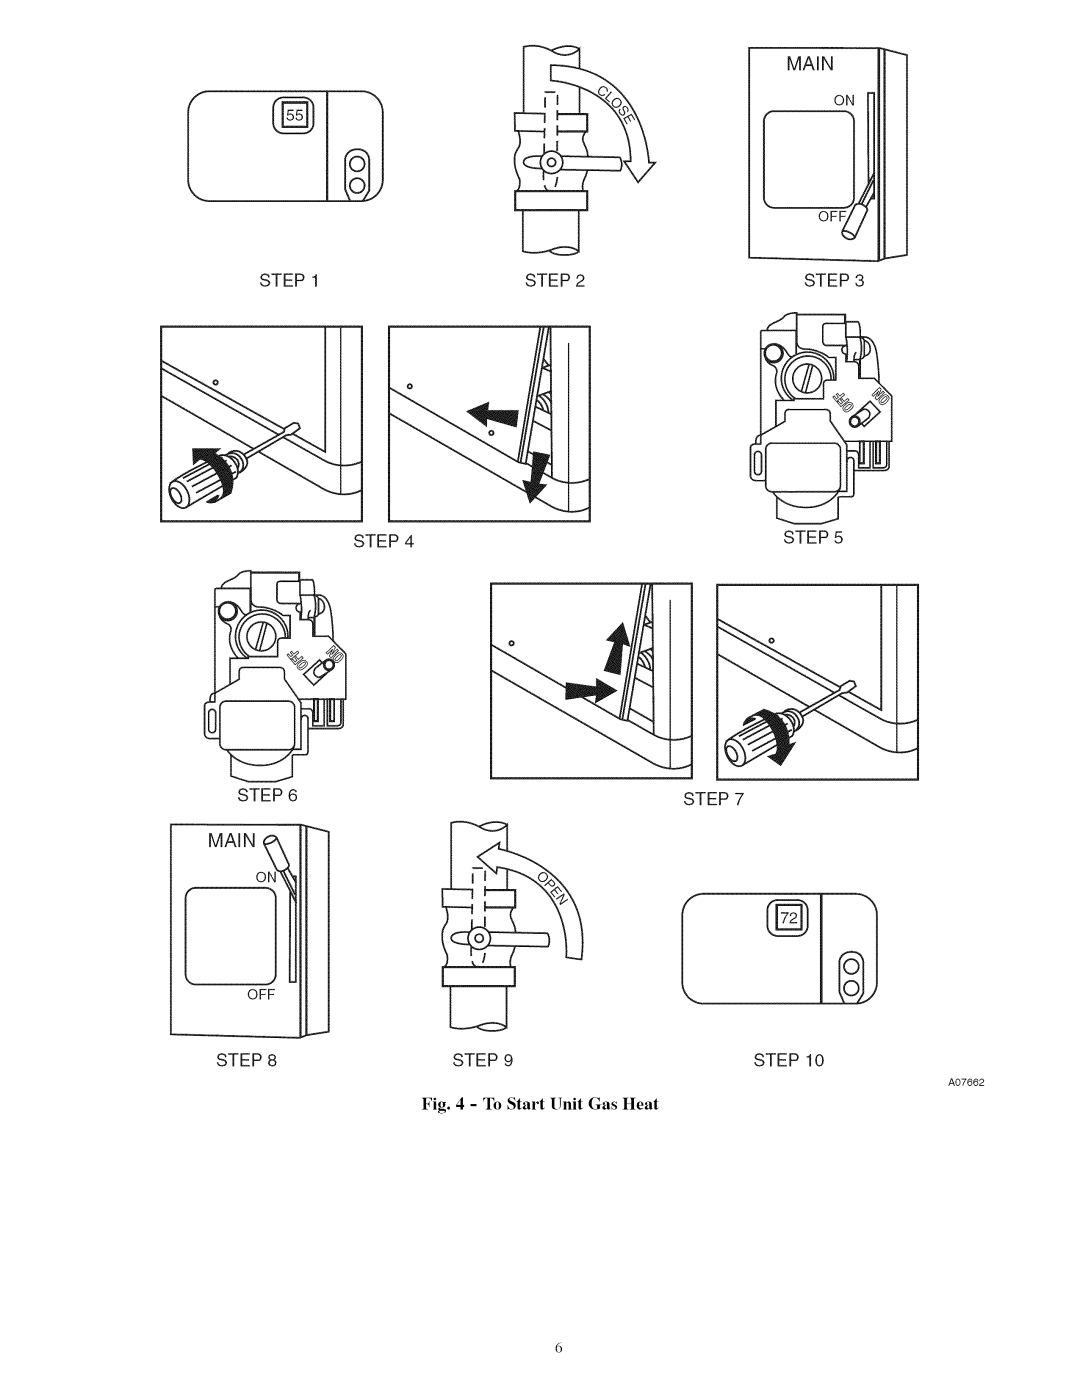 Carrier 48ES manual To Start Unit Gas Heat 